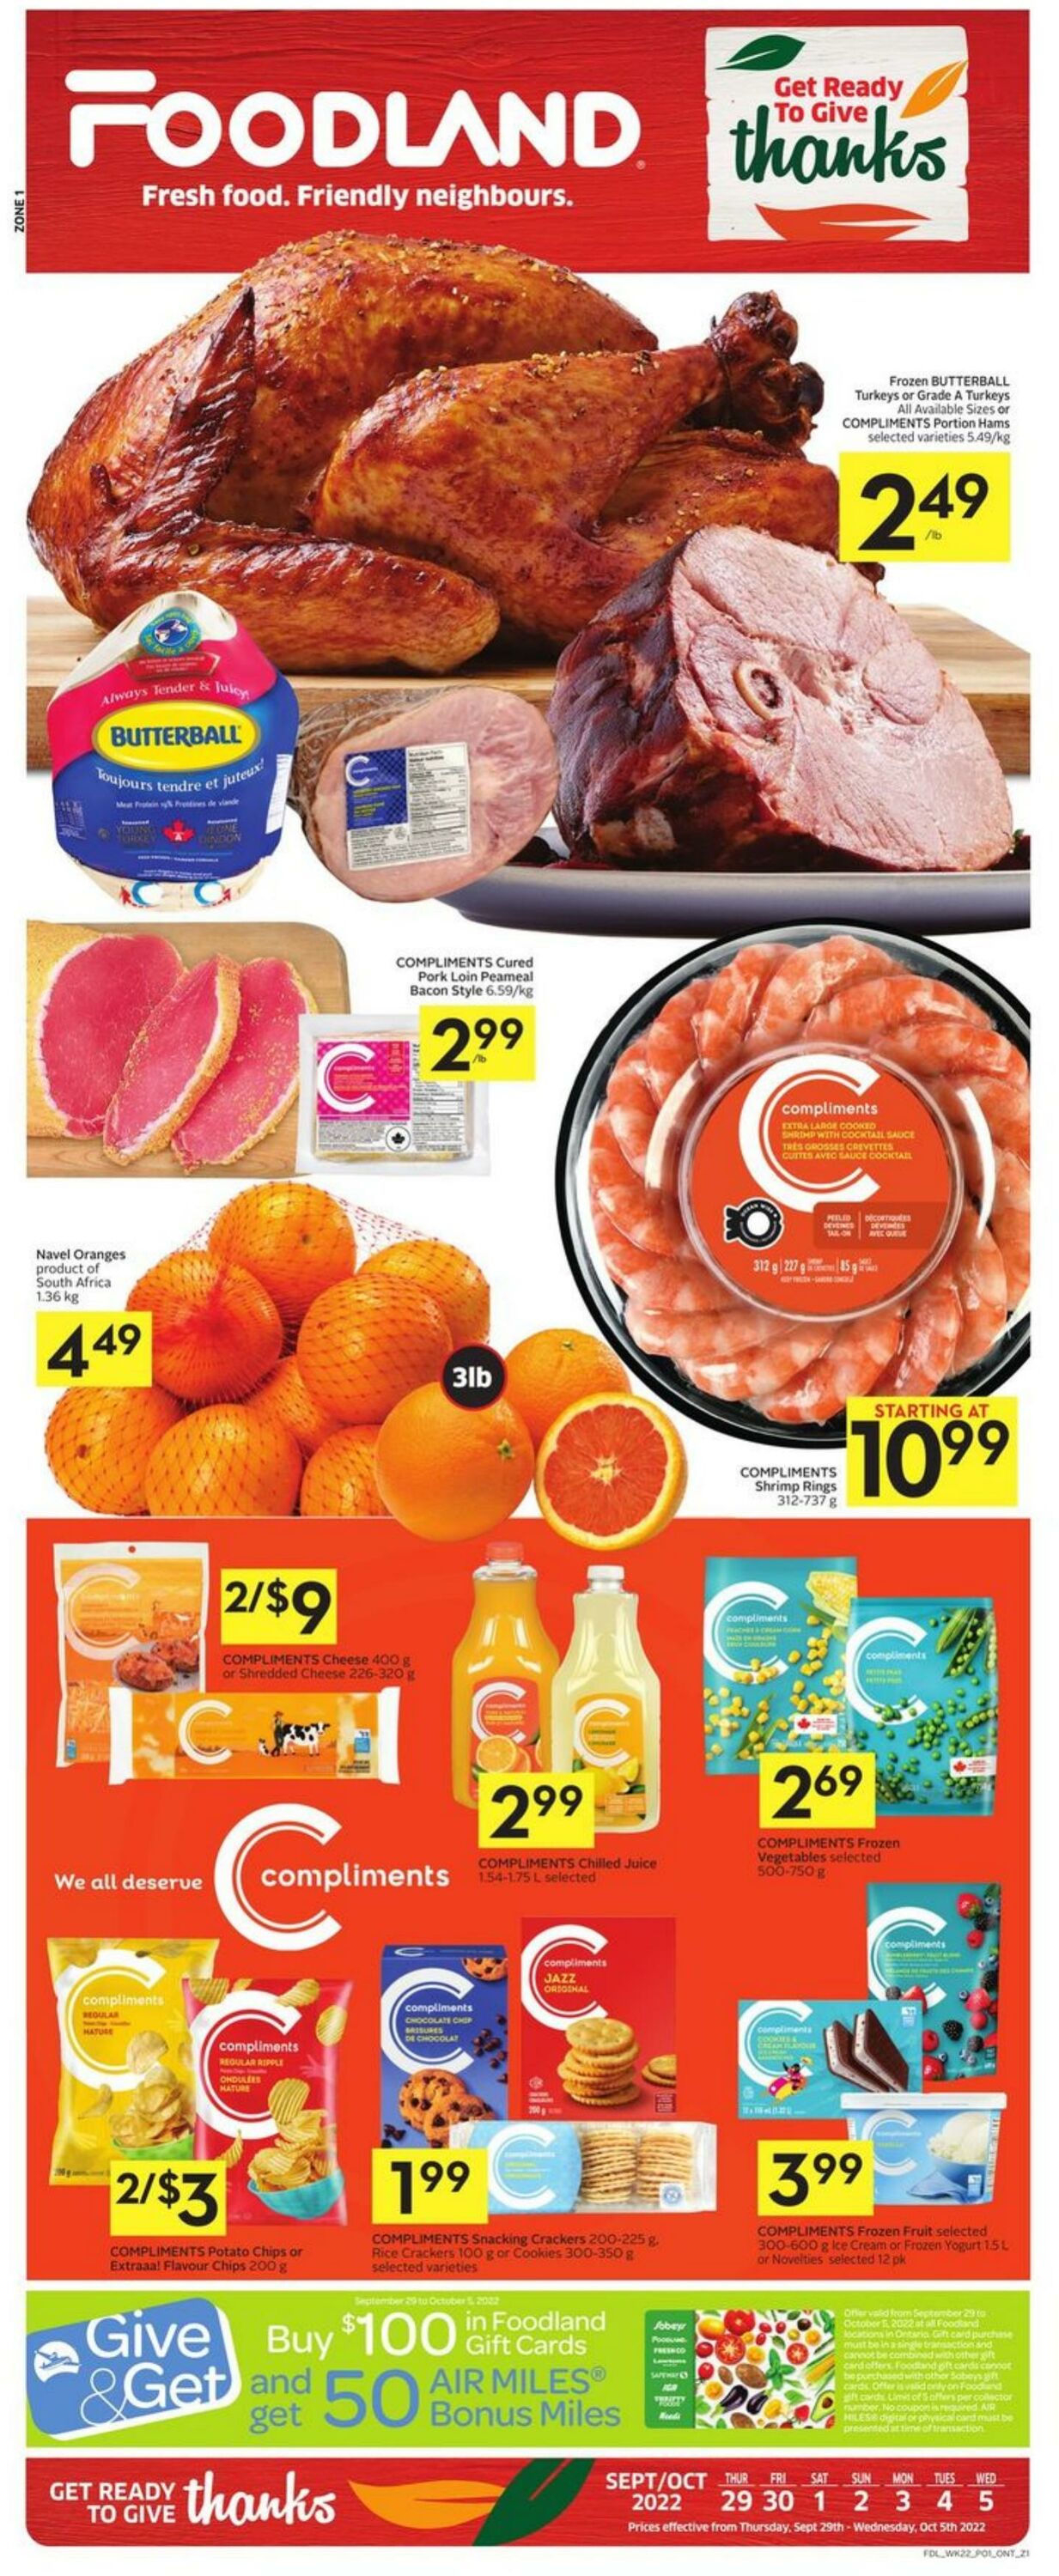 Foodland Promotional Flyer Thanksgiving Day Valid from 29.09 to 05.10 Page nb 1 flyers